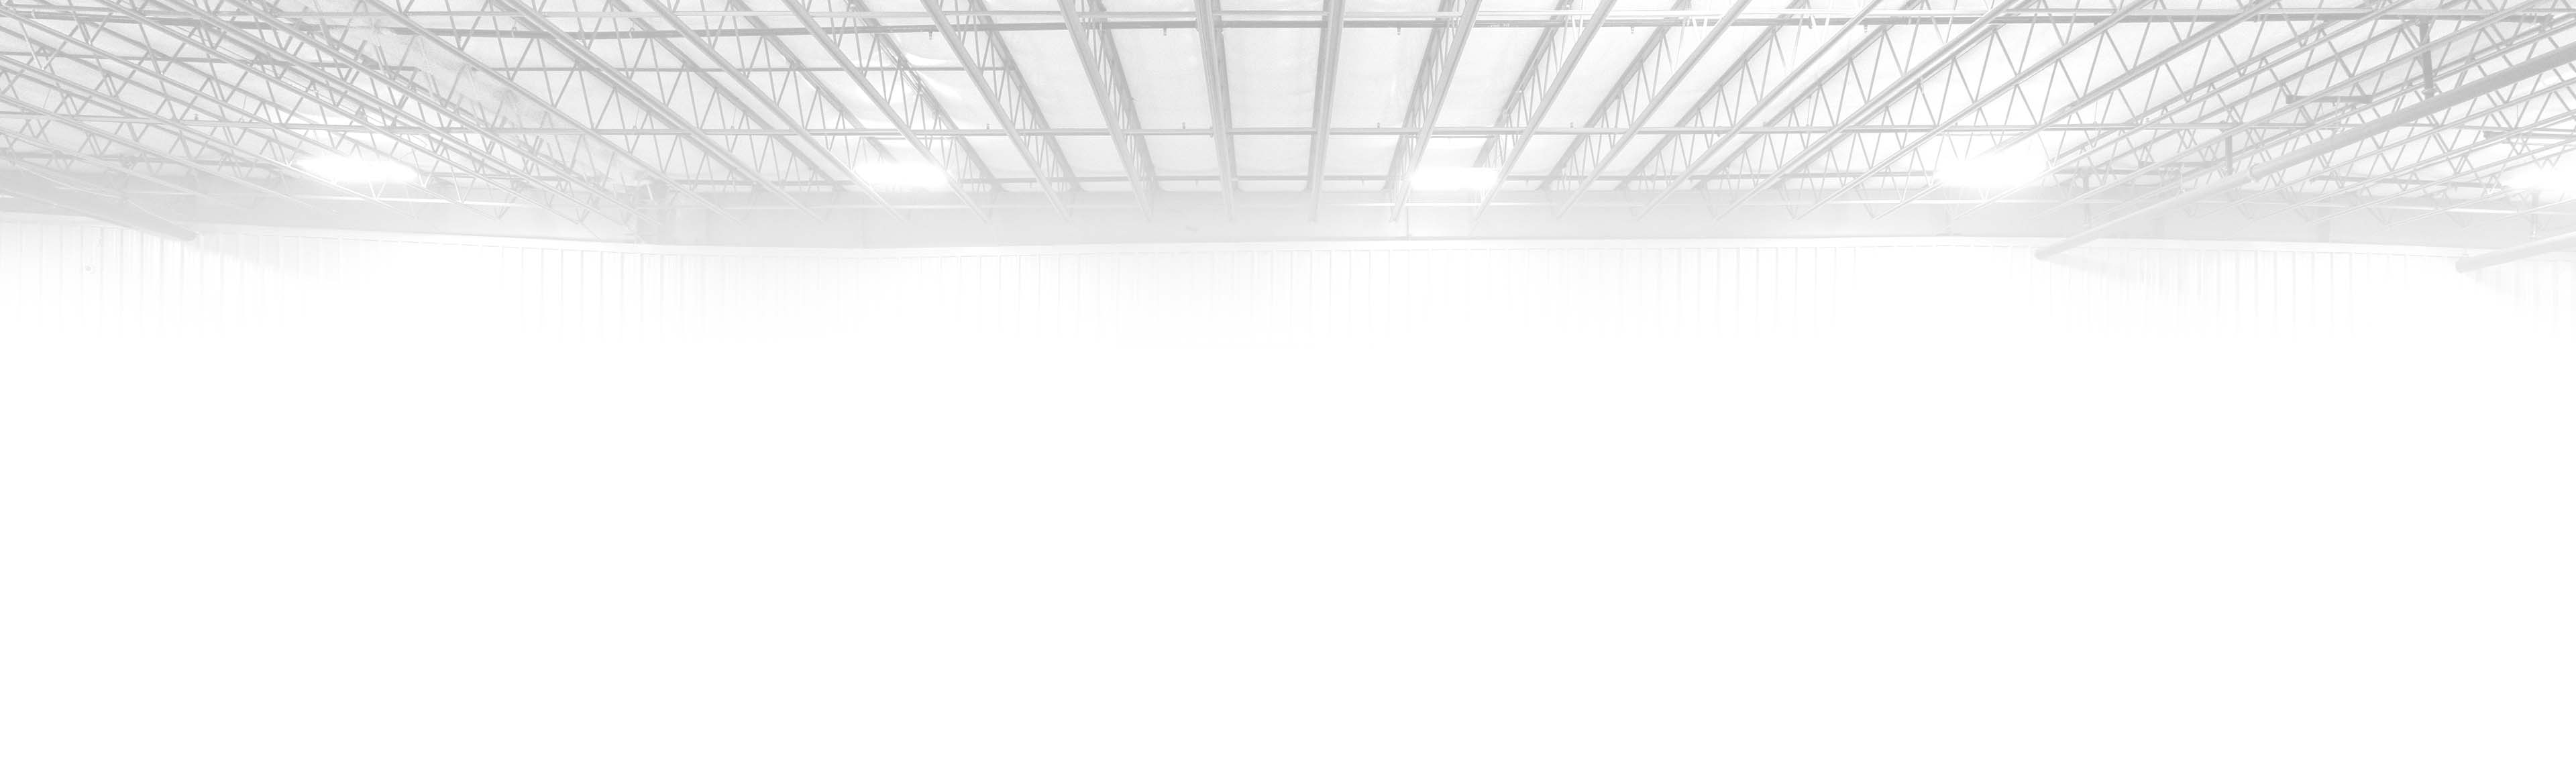 A black and white view of the rafters of a warehouse.